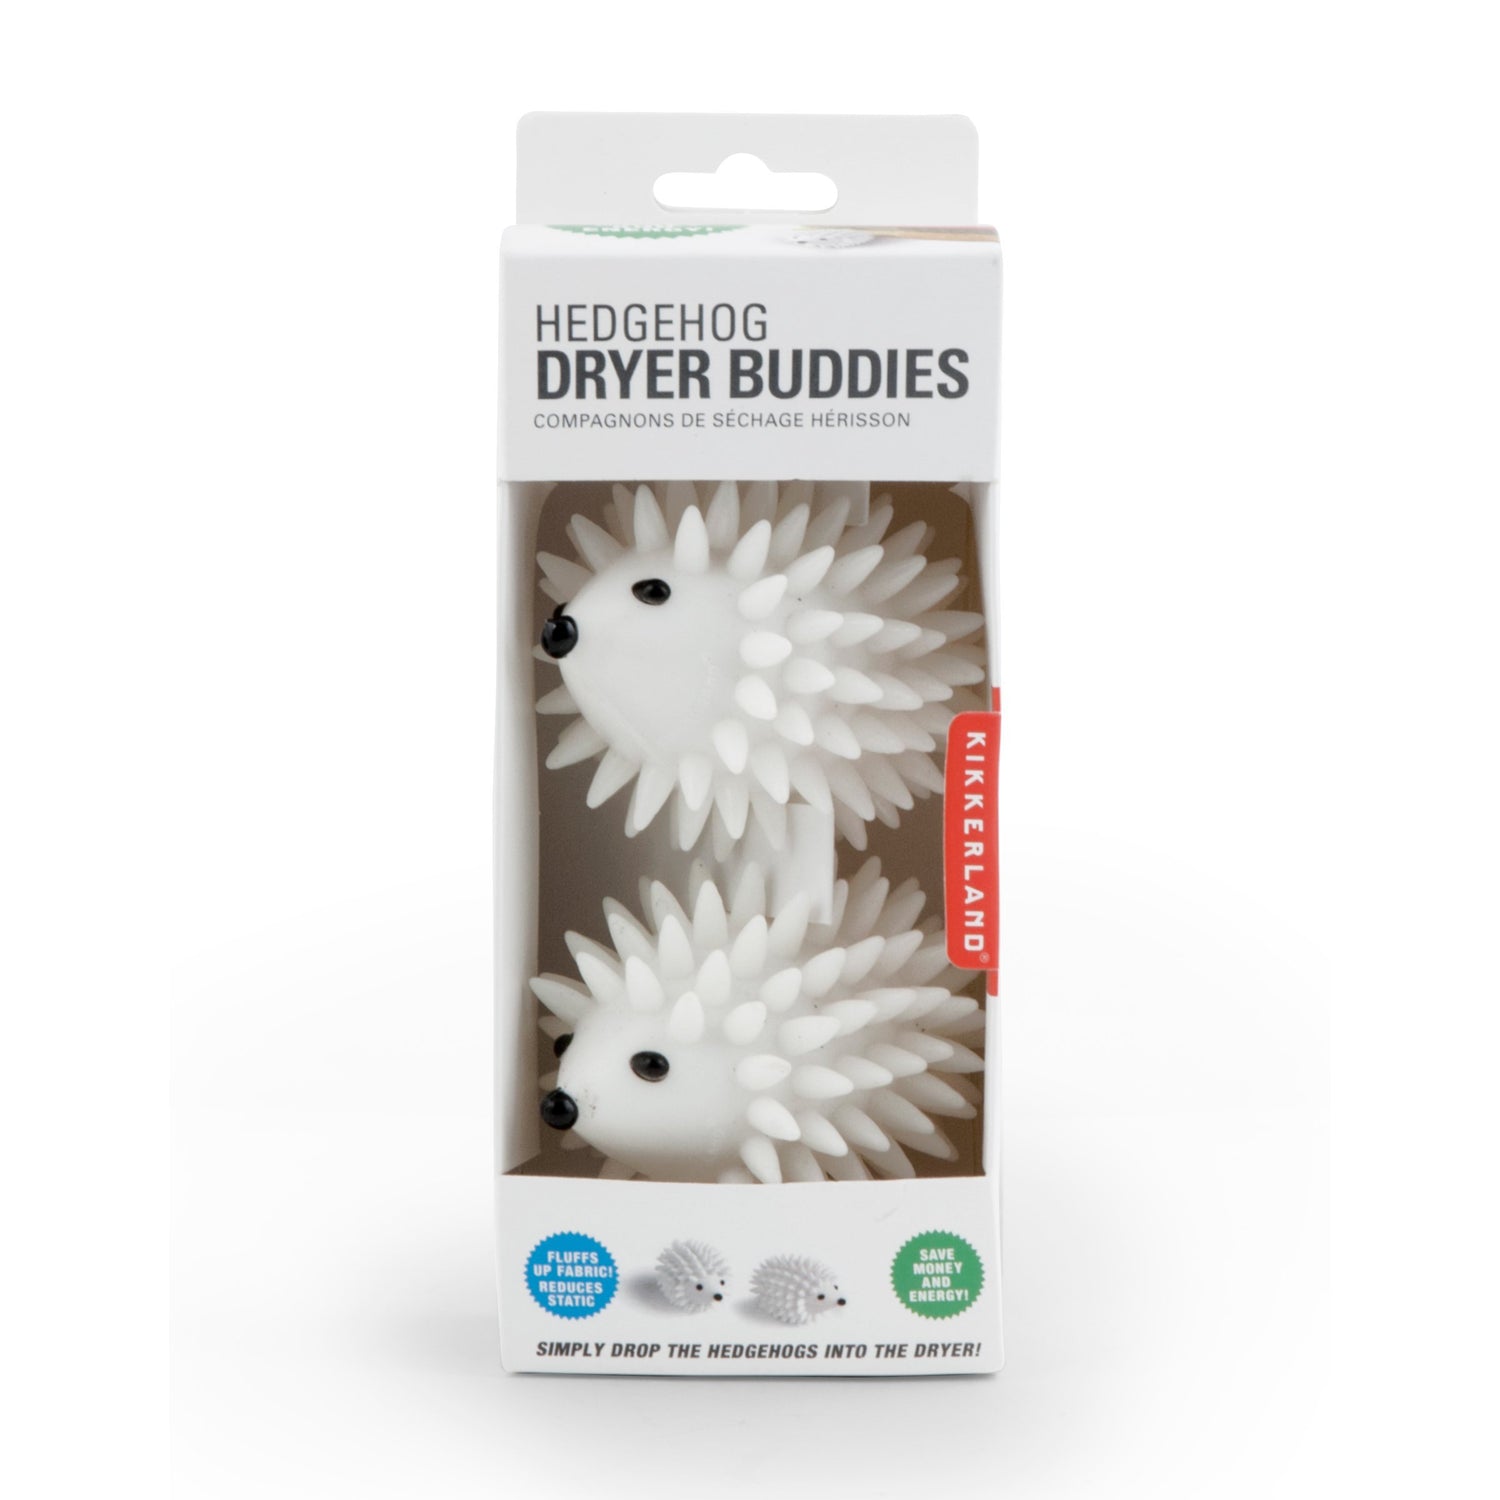 Hedgehog Dryer Buddies - Lowers drying time and saves energy - Set of 2